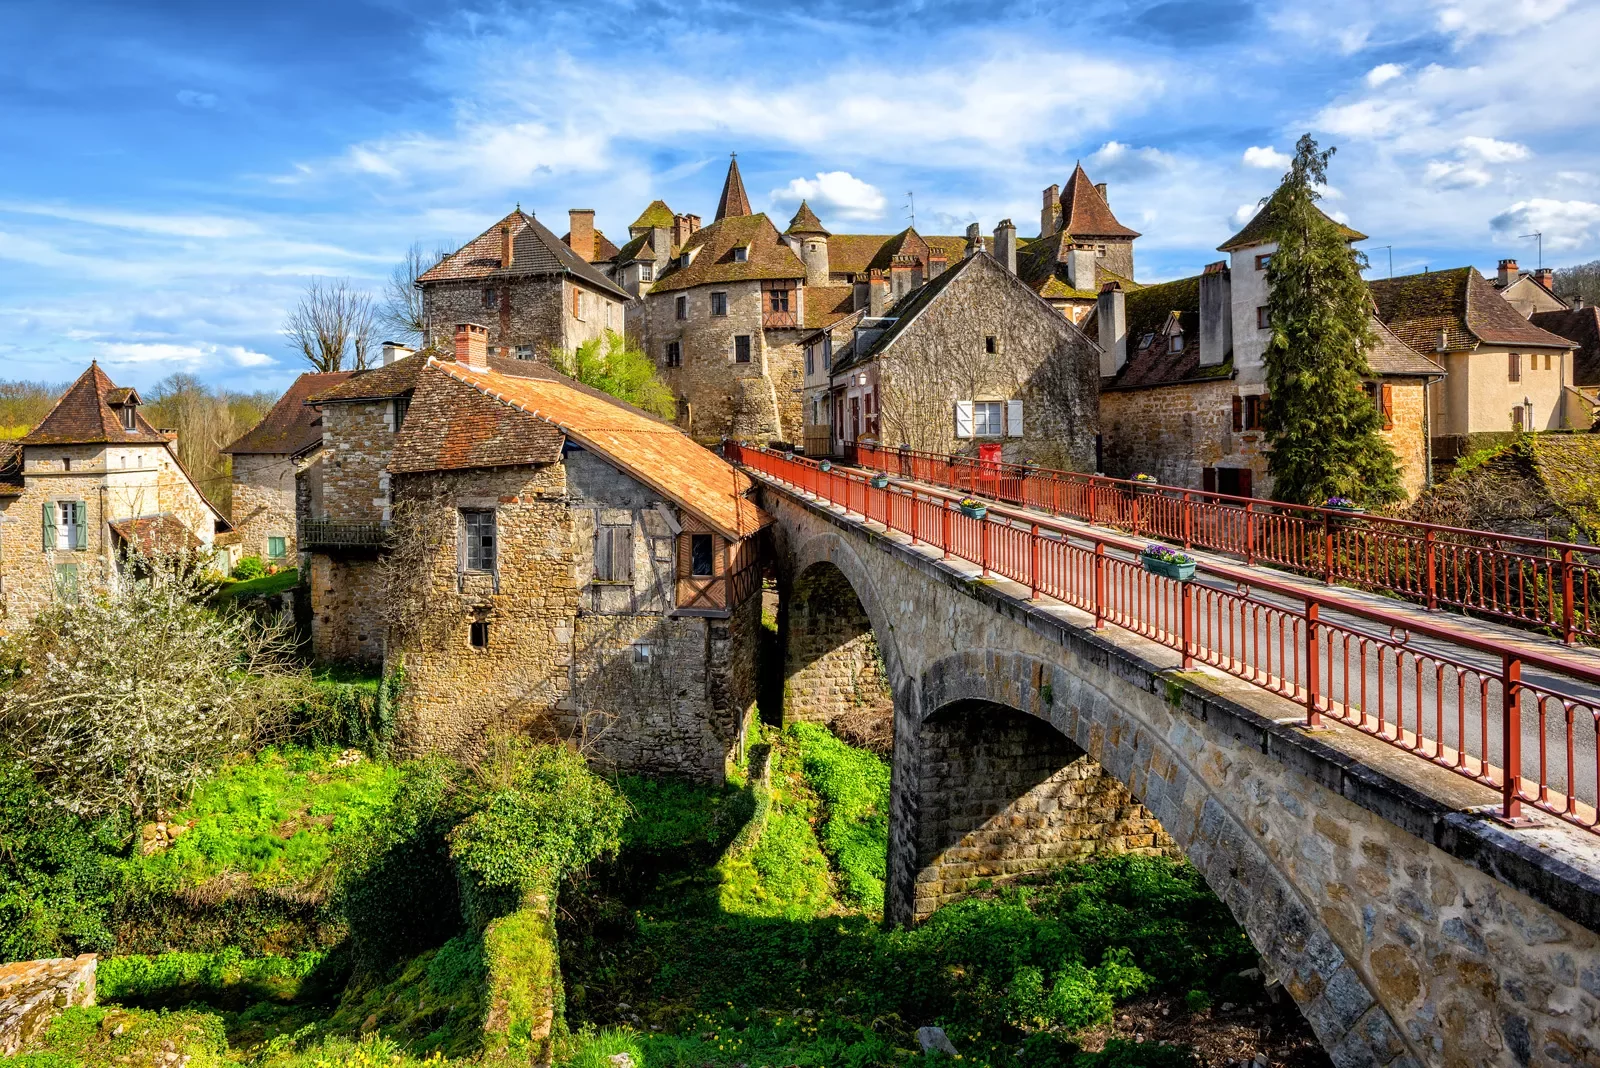 stone bridge with stone buildings in the back